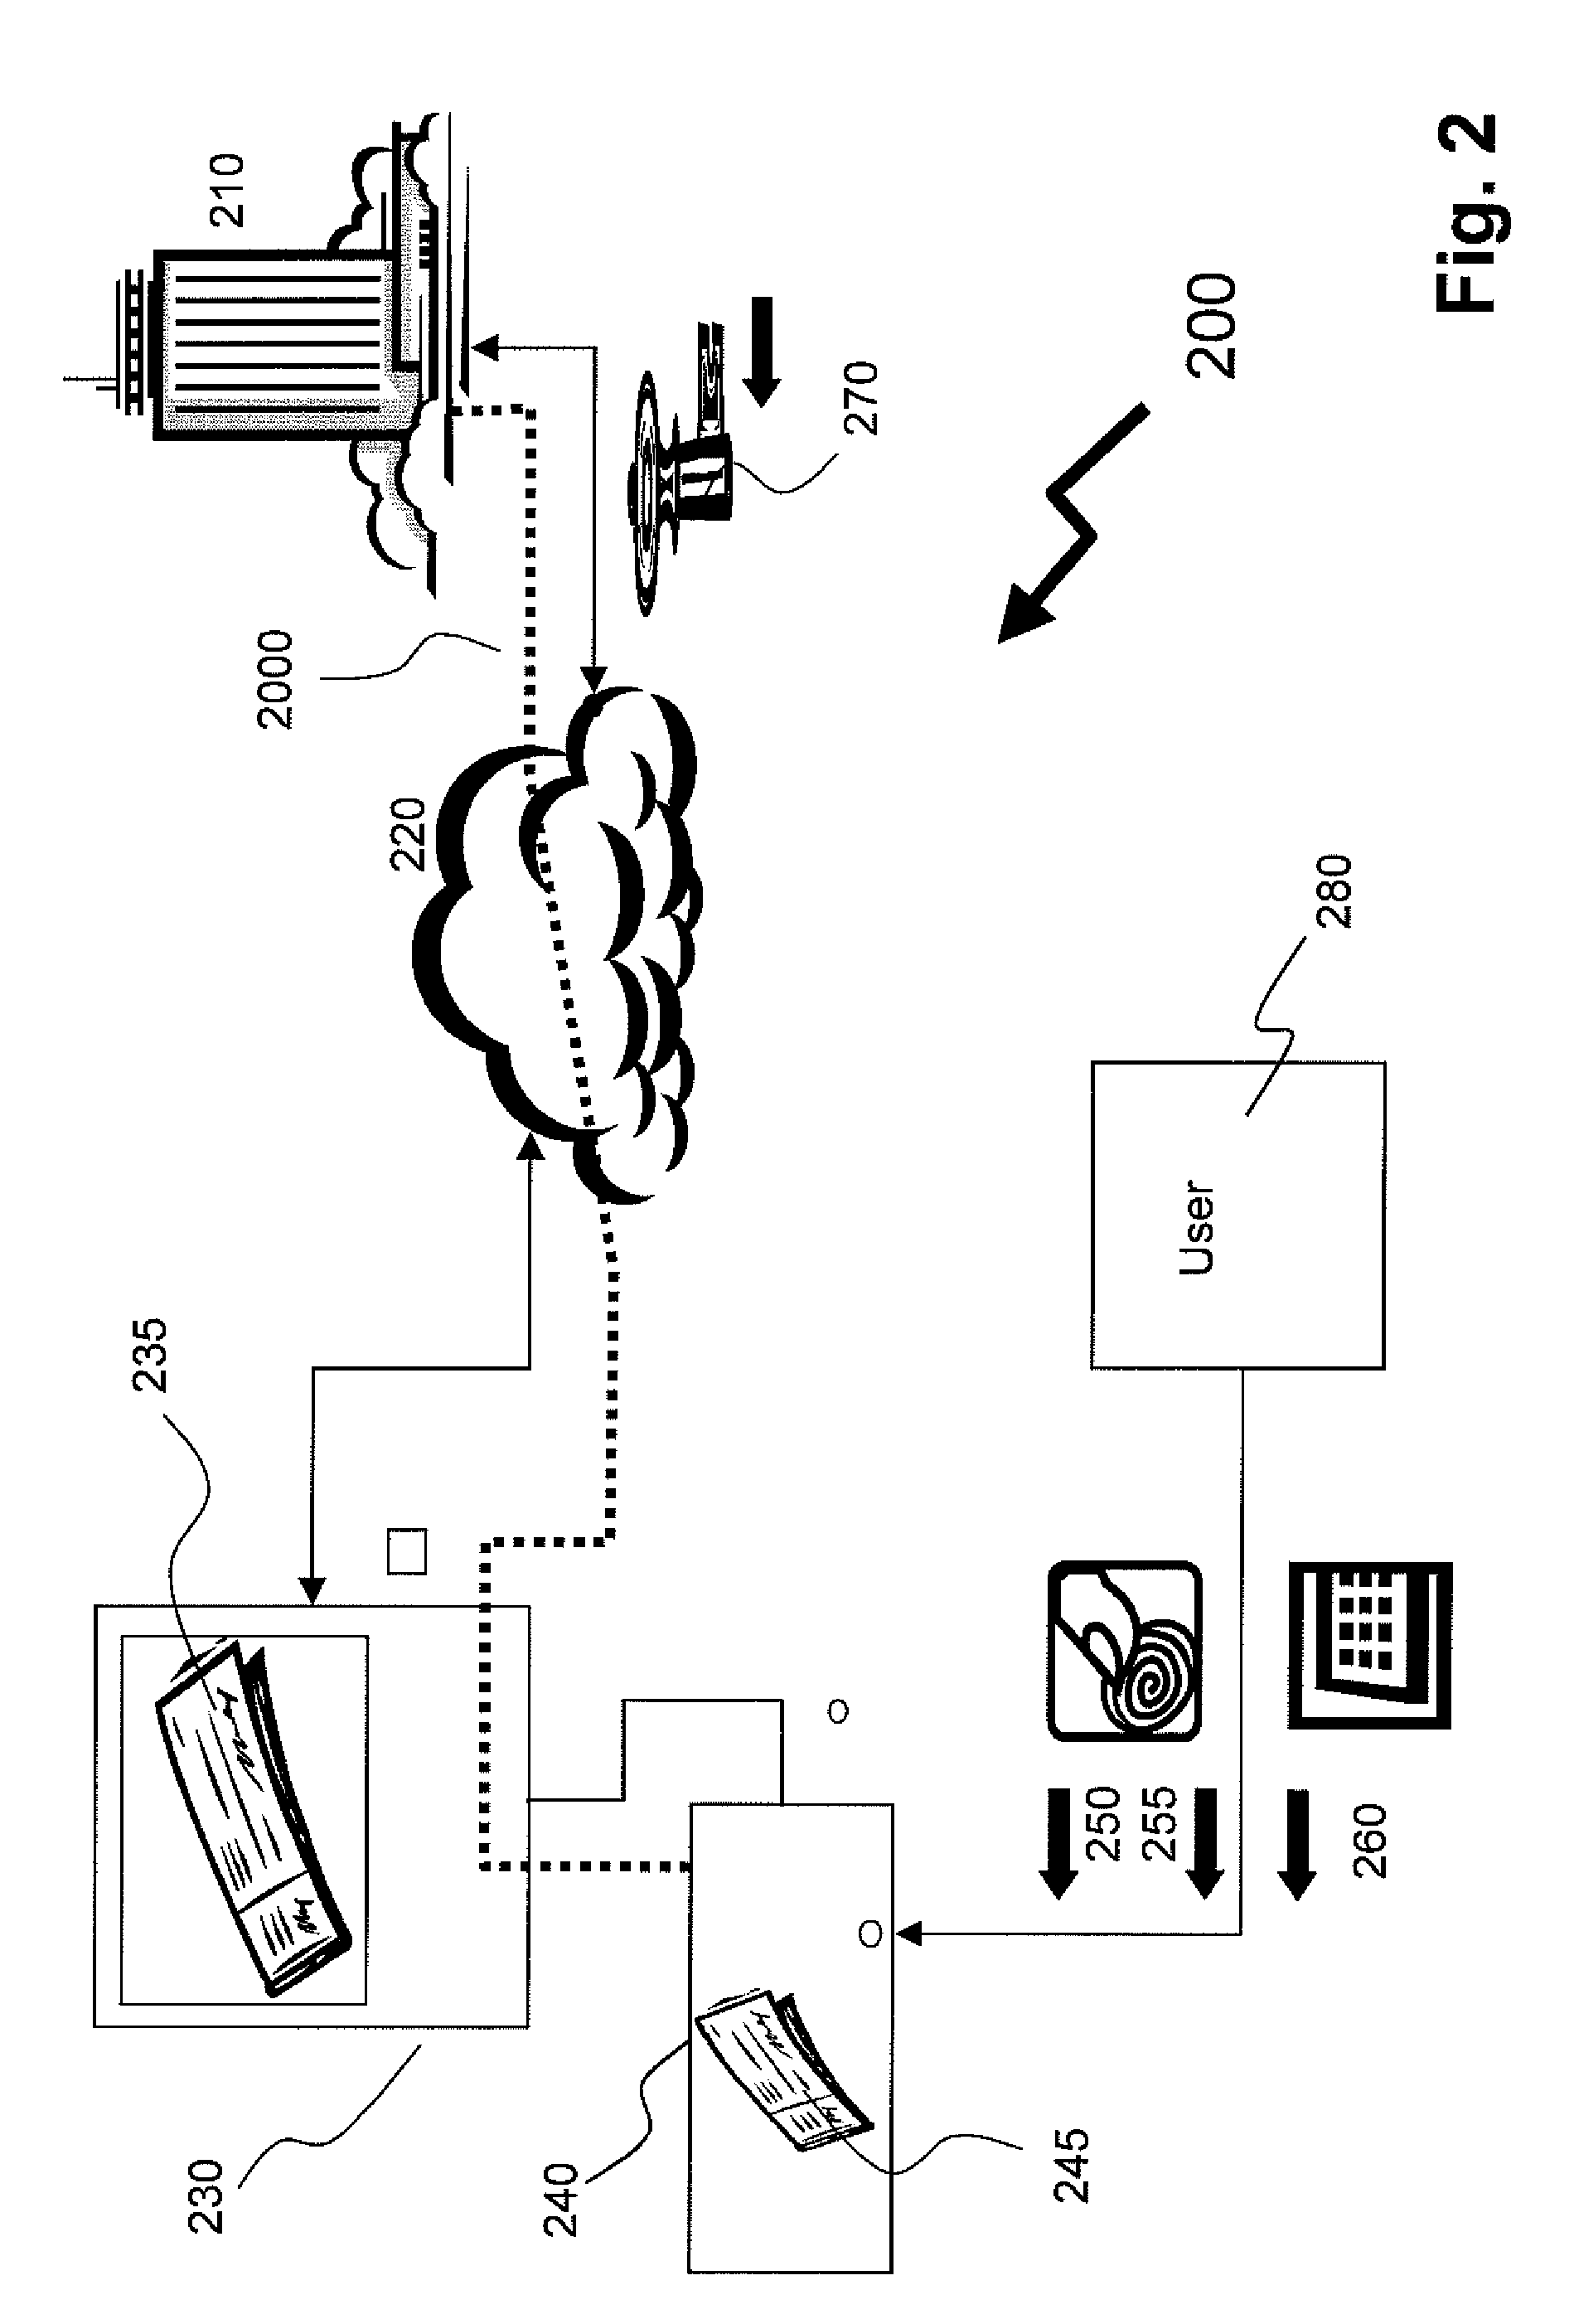 Method of Providing Assured Transactions by Watermarked File Display Verification